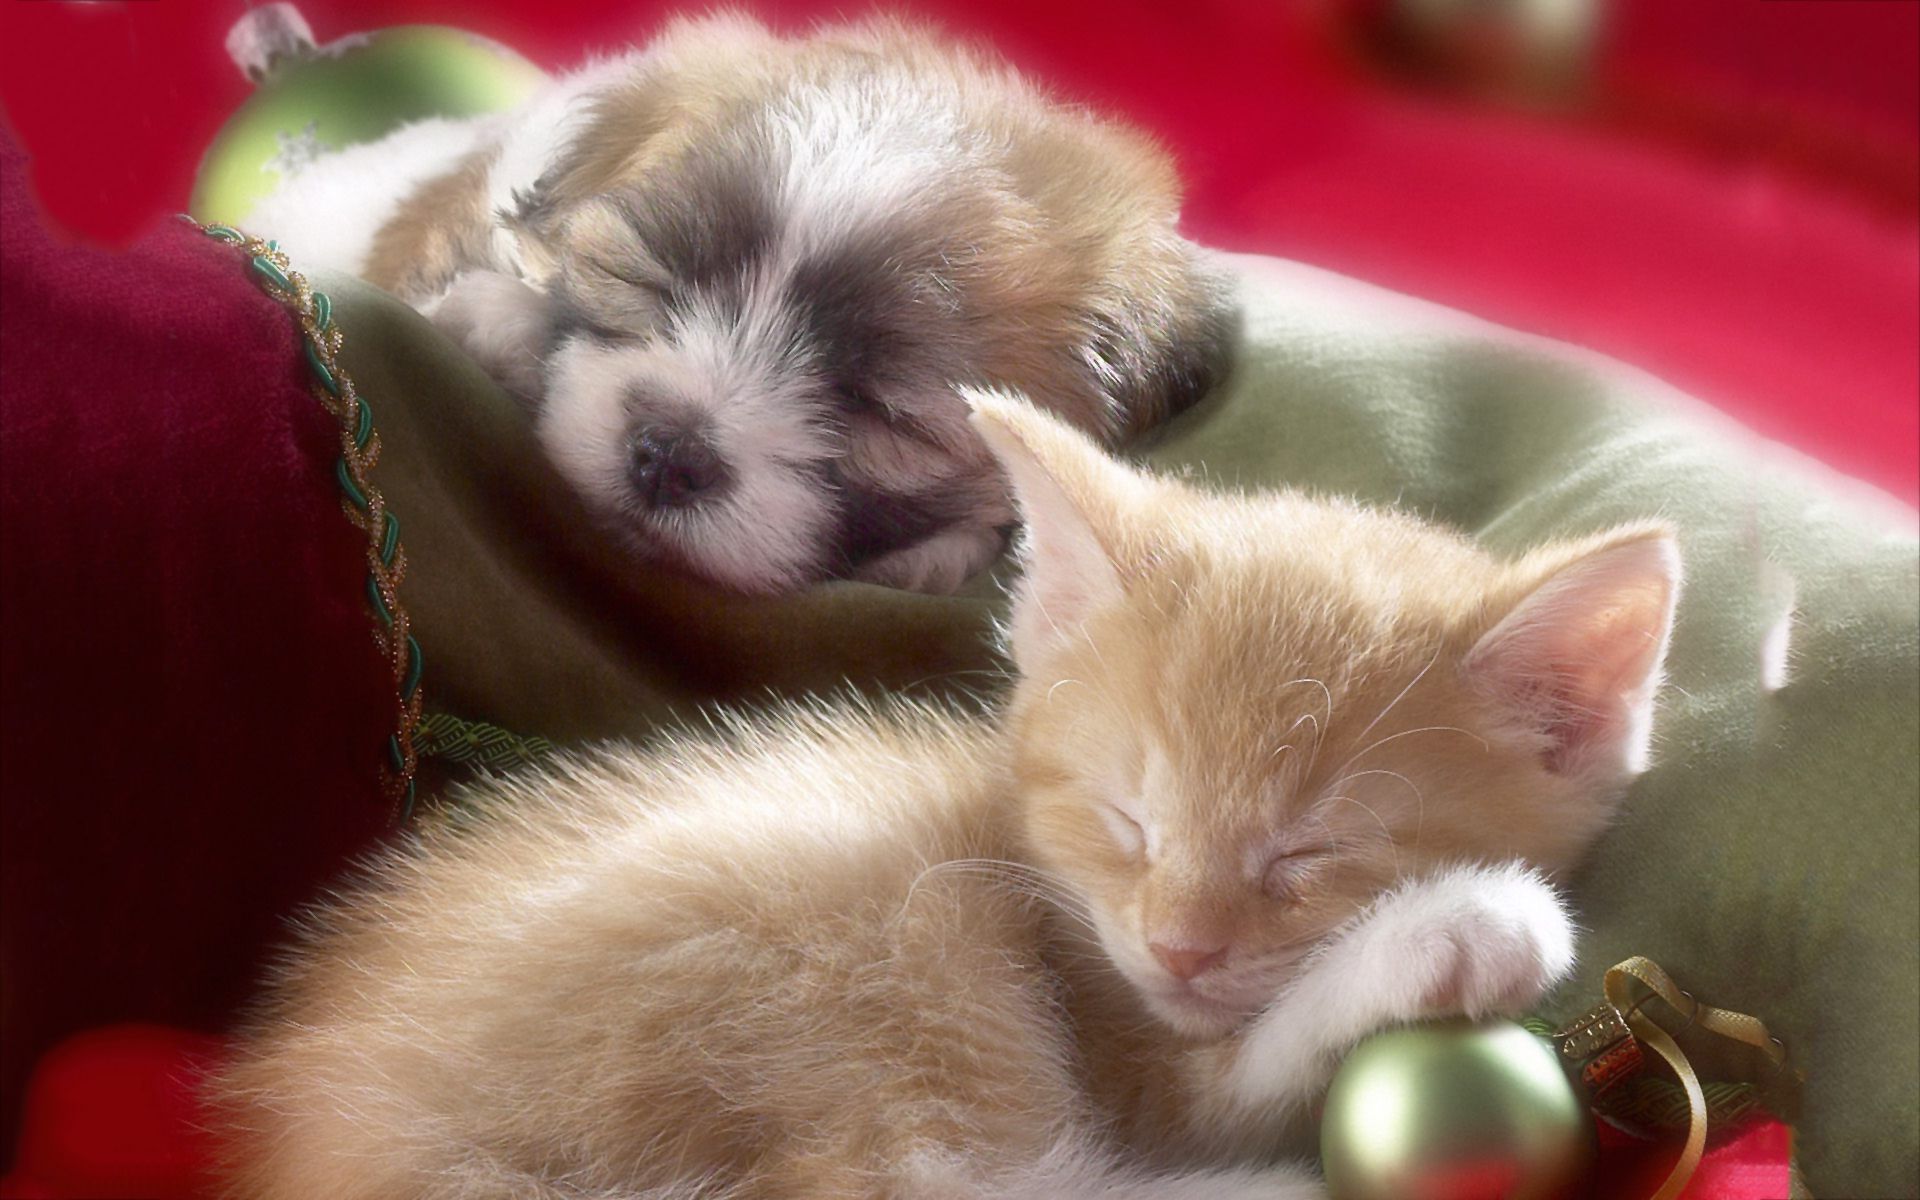 Kitten And Puppy Wallpaper High Quality Resolution. Kittens and puppies, Puppy wallpaper, Puppies